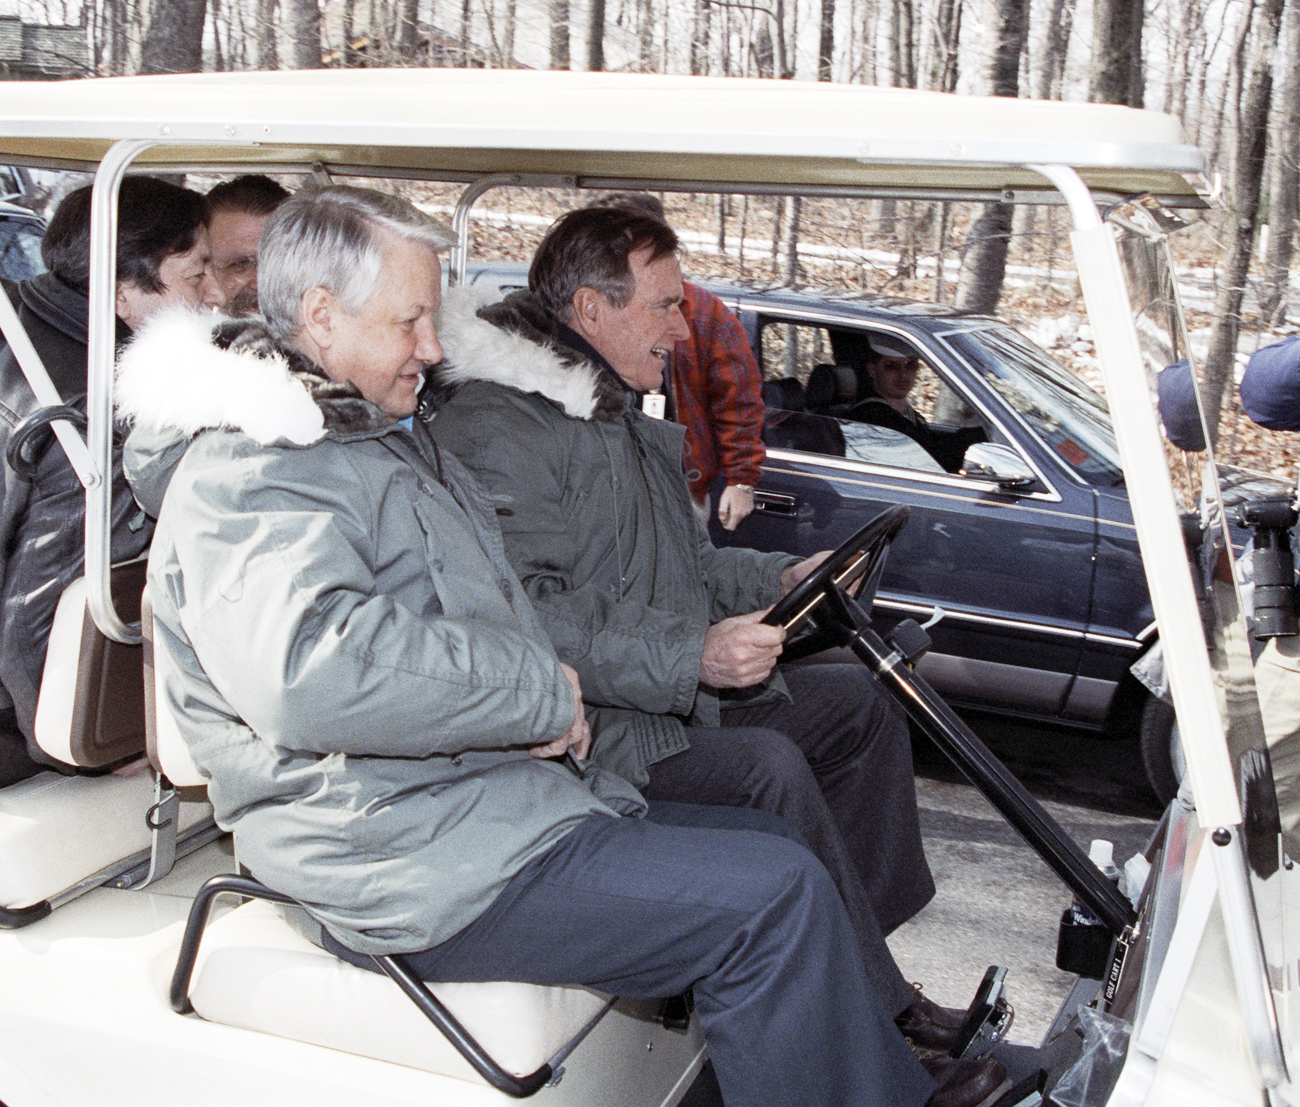 Russian President Boris Yeltsin oversaw the official end of the Cold War on Feb. 1, 1992 at a meeting with George Bush. Photo: Russian President Boris Yeltsin (left) and U.S. President George Bush (right) at Camp David.